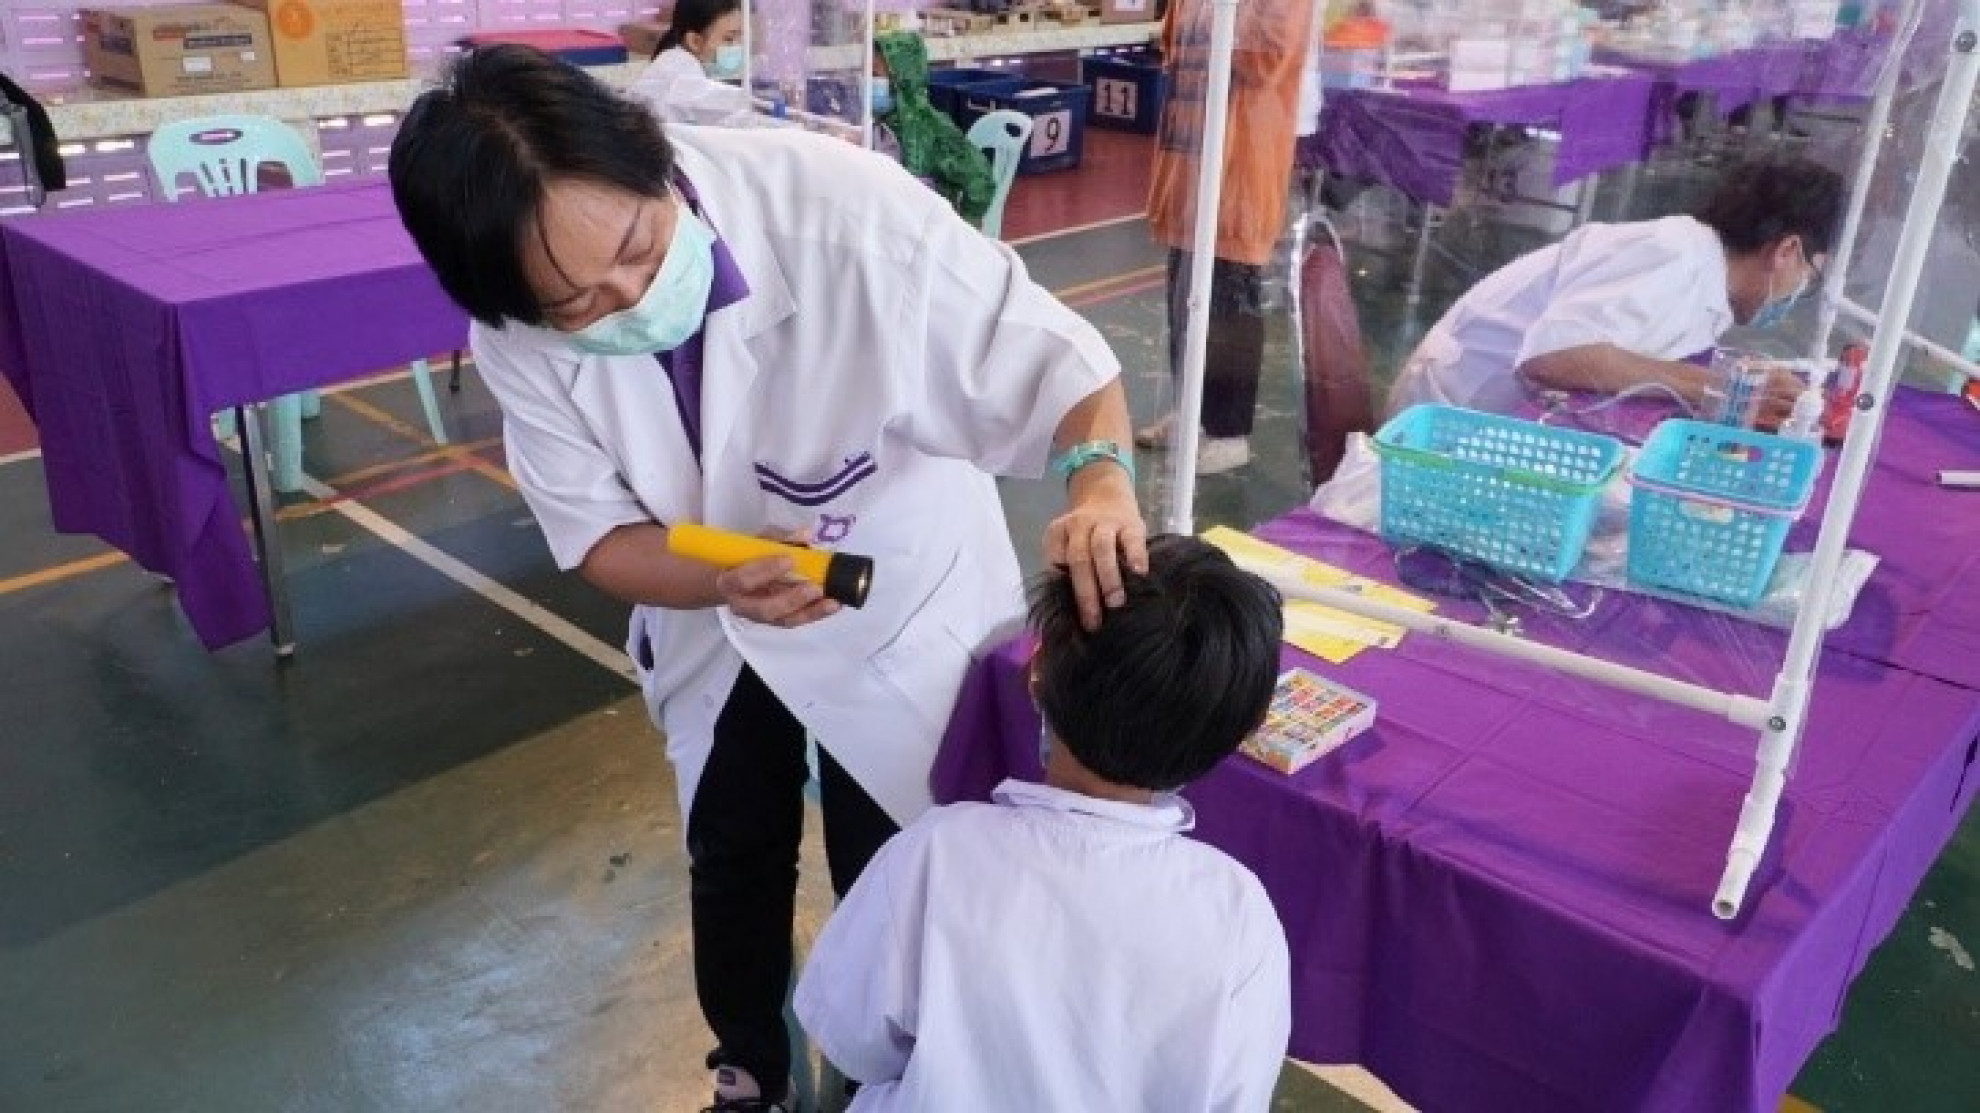 Doctors and dentists provided the physical examination and performed oral health assessment for students and local people.